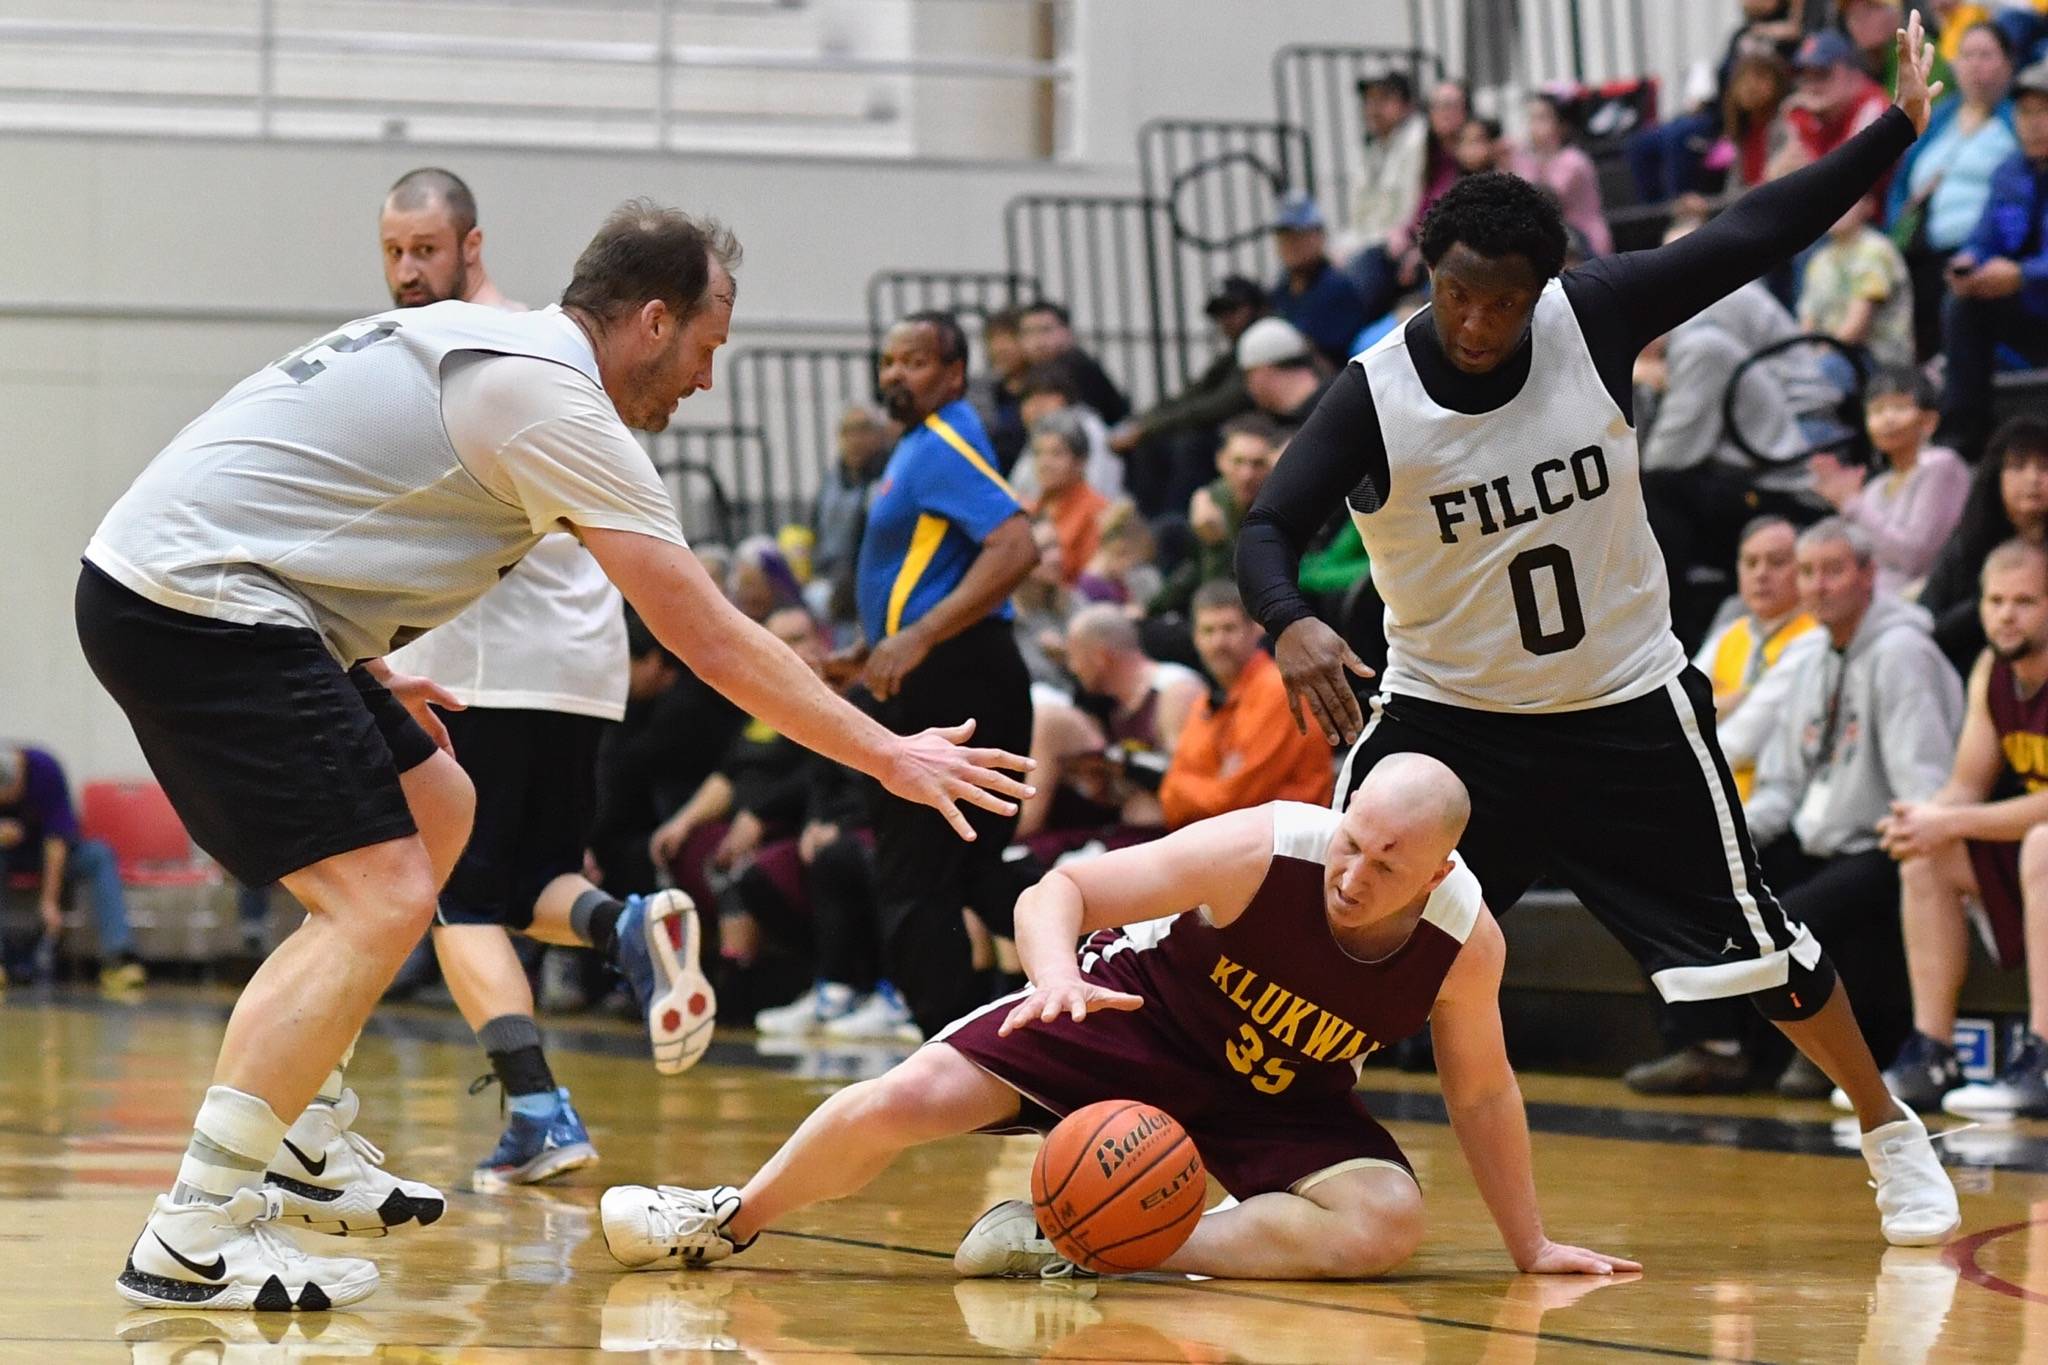 Klukwan’s Brian Friske, center, goes for a loose ball against Filcom’s Greg Lockwood, left, and Rob Ridgeway in their C bracket game at the Lions Club’s Gold Medal Basketball Tournament on Thursday, March 21, 2019. (Michael Penn | Juneau Empire)